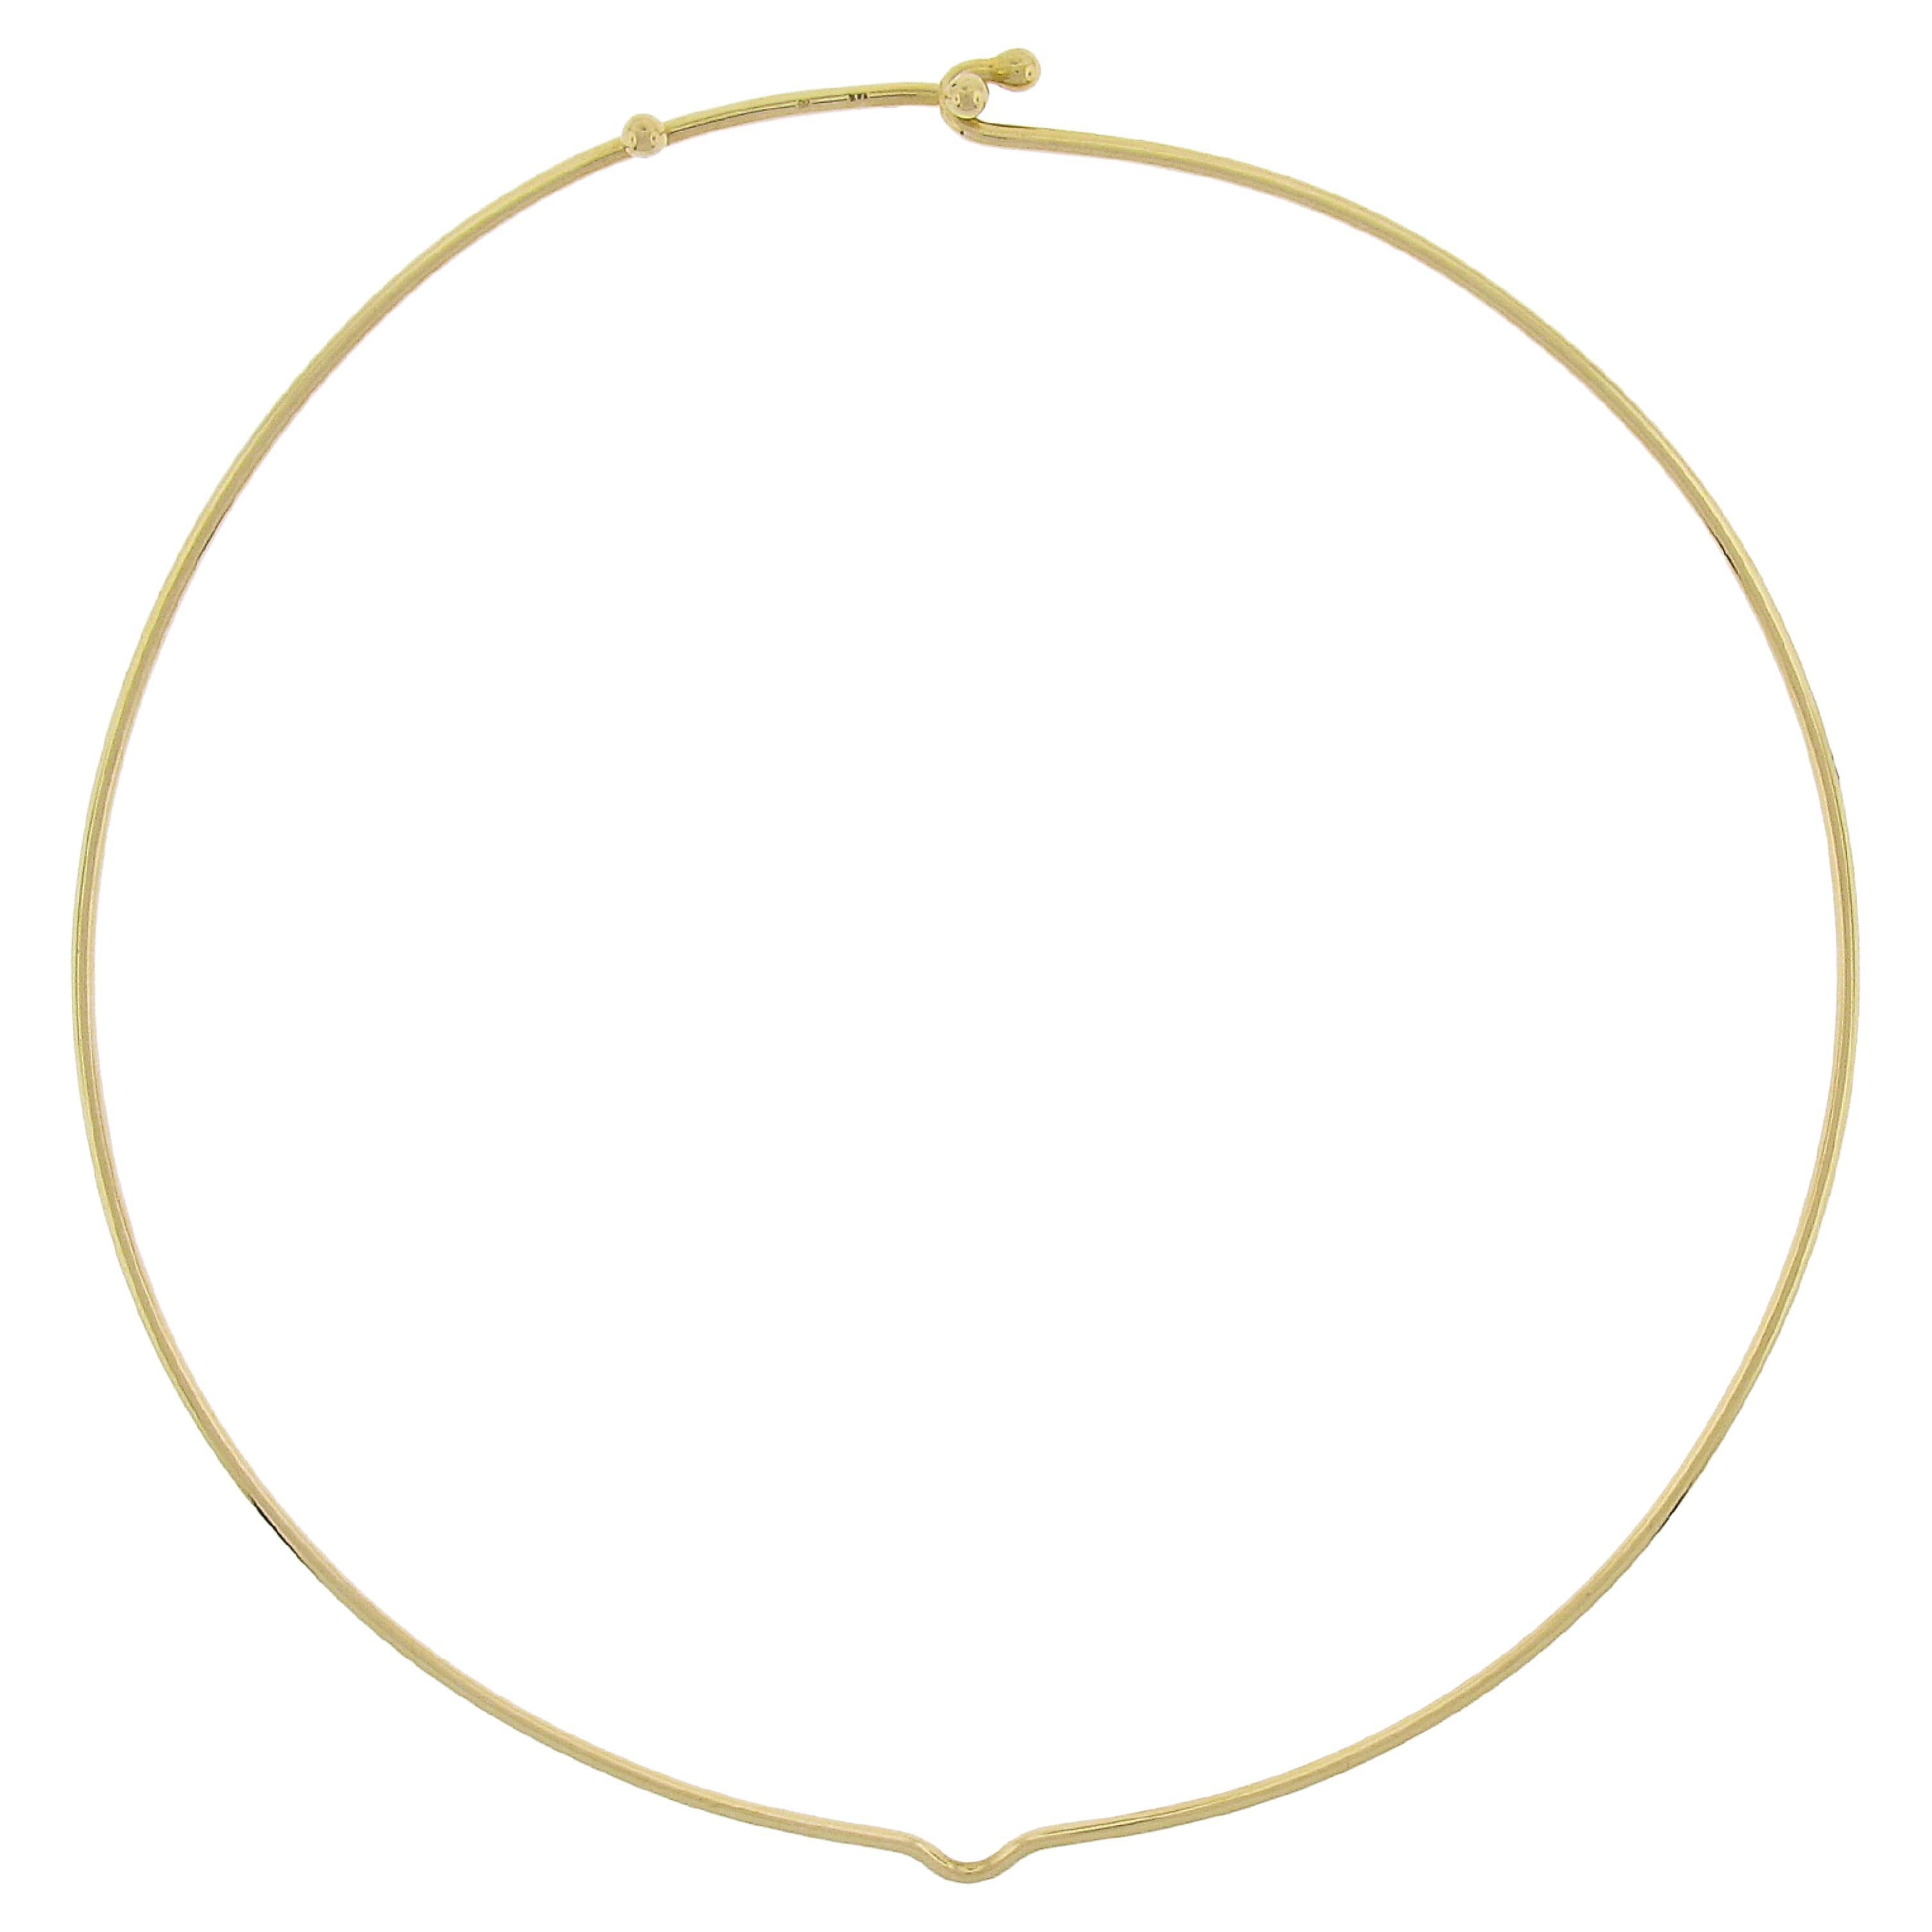 14K Yellow Gold Adjustable 14" & 15" Wire Choker Necklace w/ Hook Closure